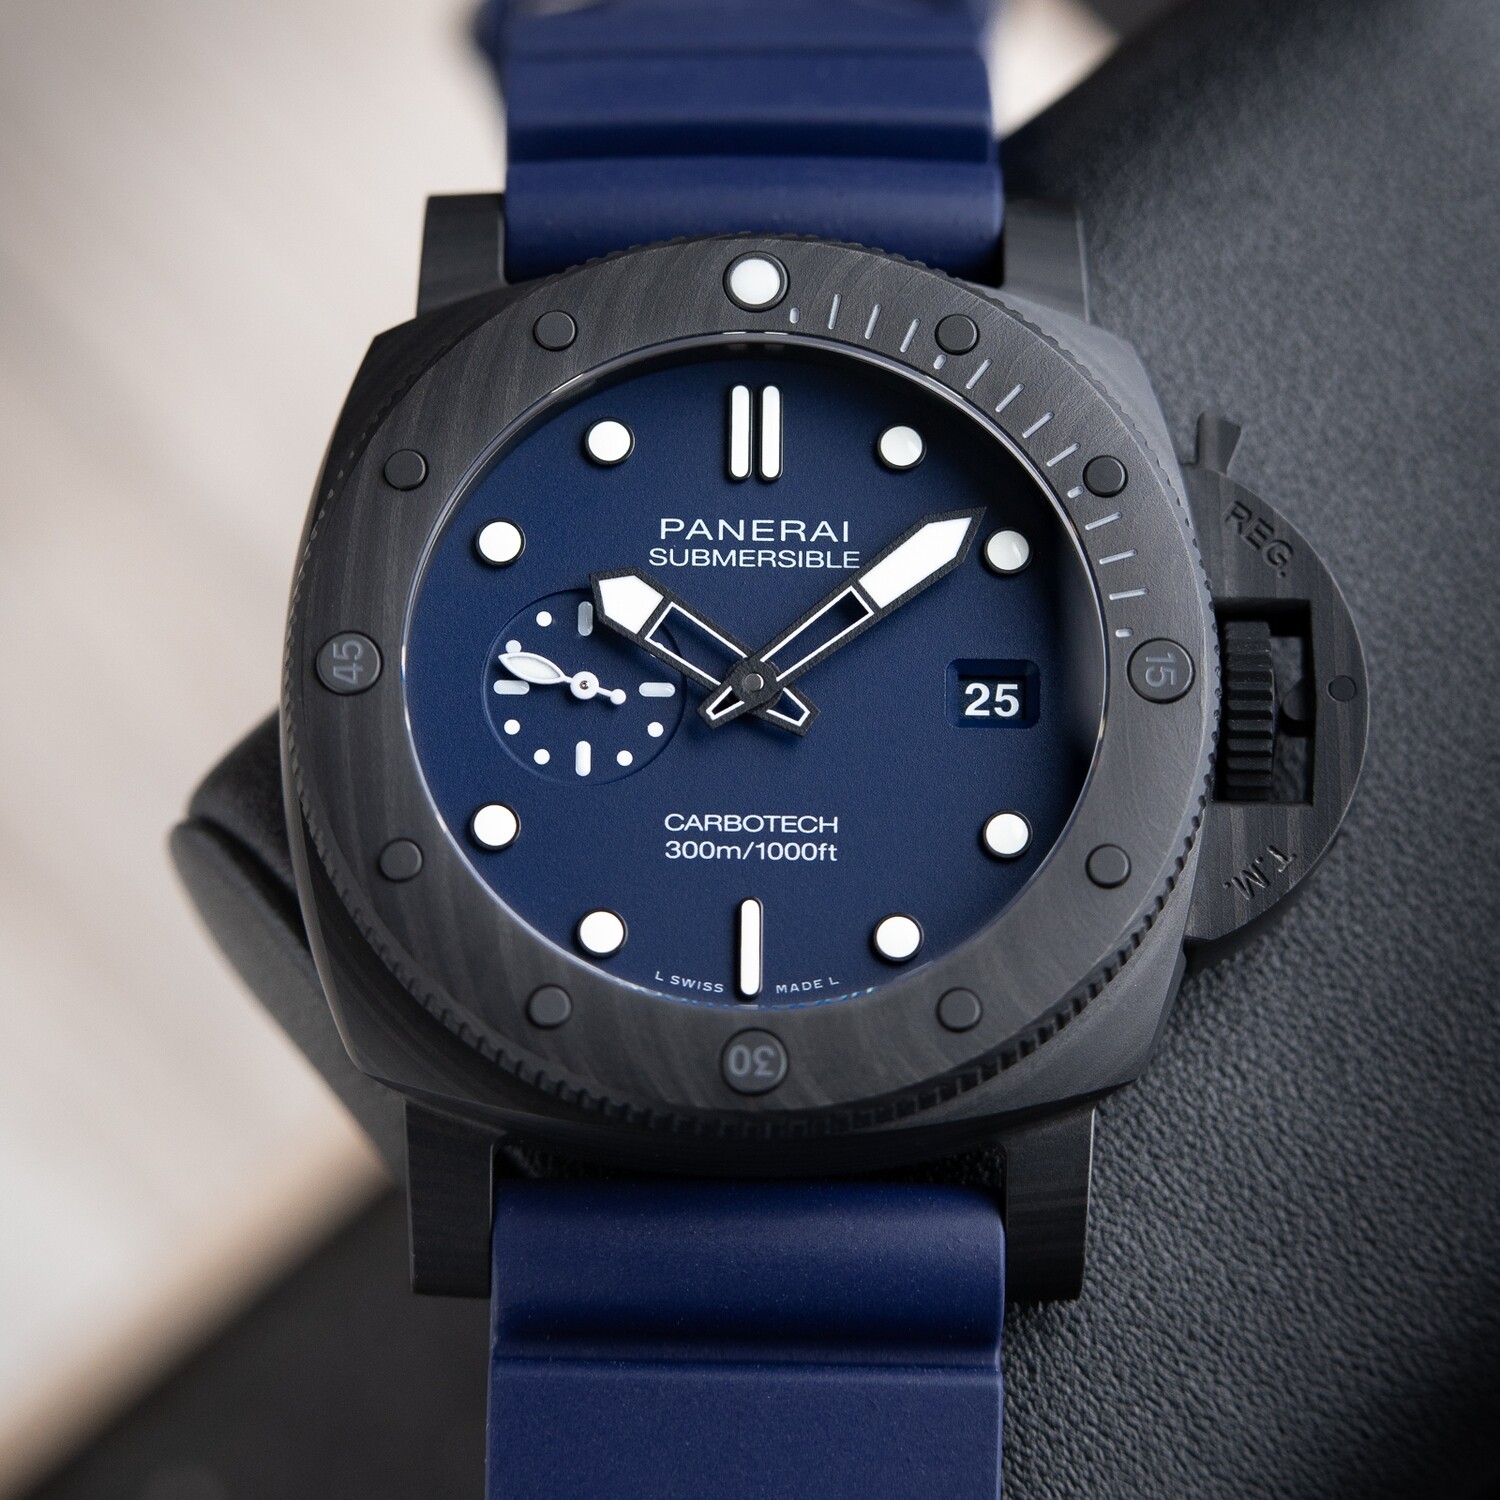 Panerai Luminor Submersible Carbotech Date Blue Automatic PAM1232 44mm